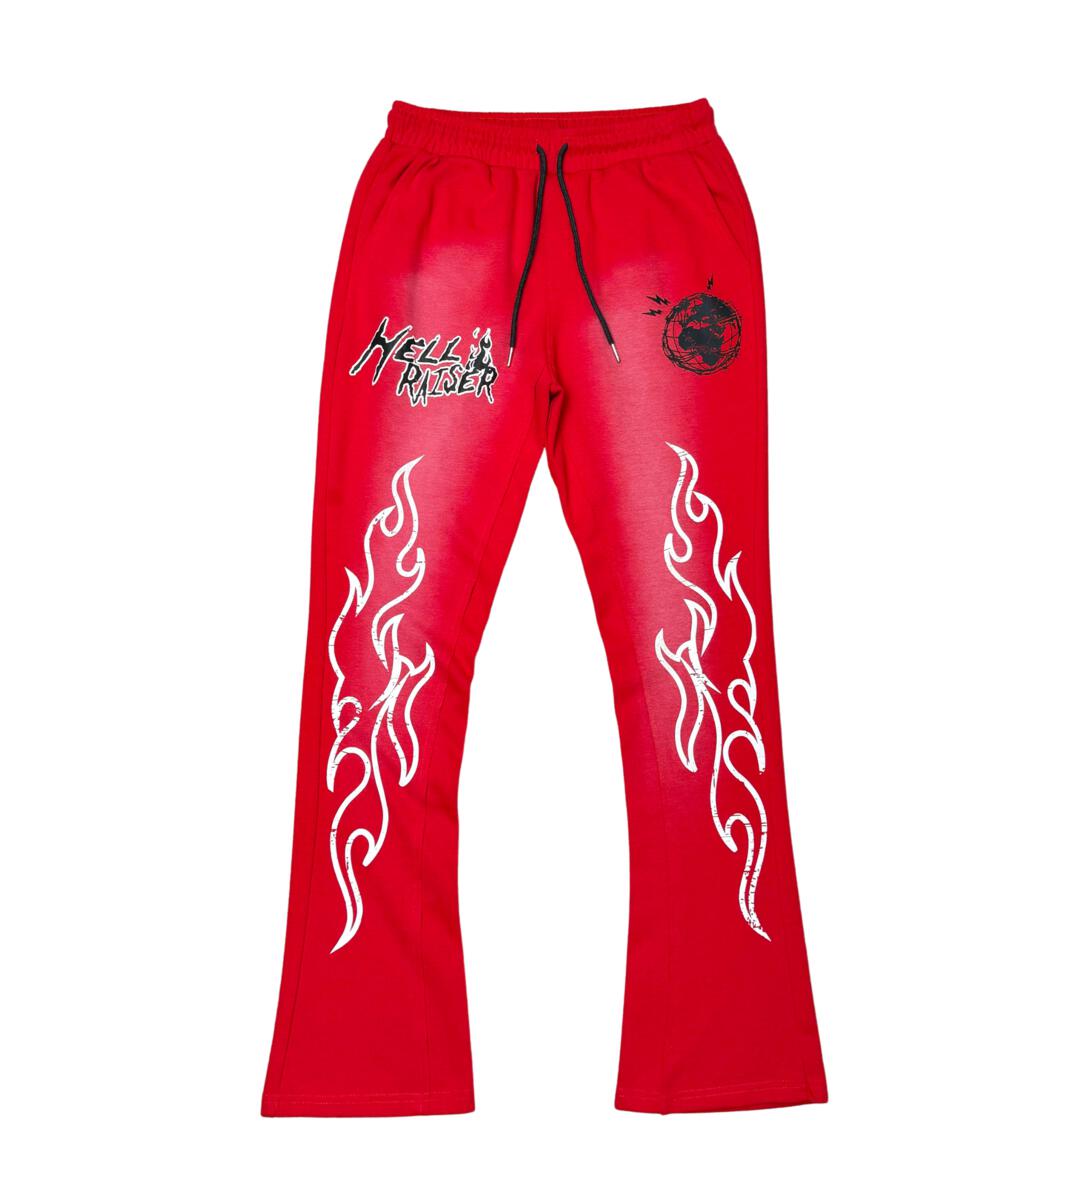 CIVILIZED WORLD TOUR VINTAGE RED STACKED FLARE JOGGERS